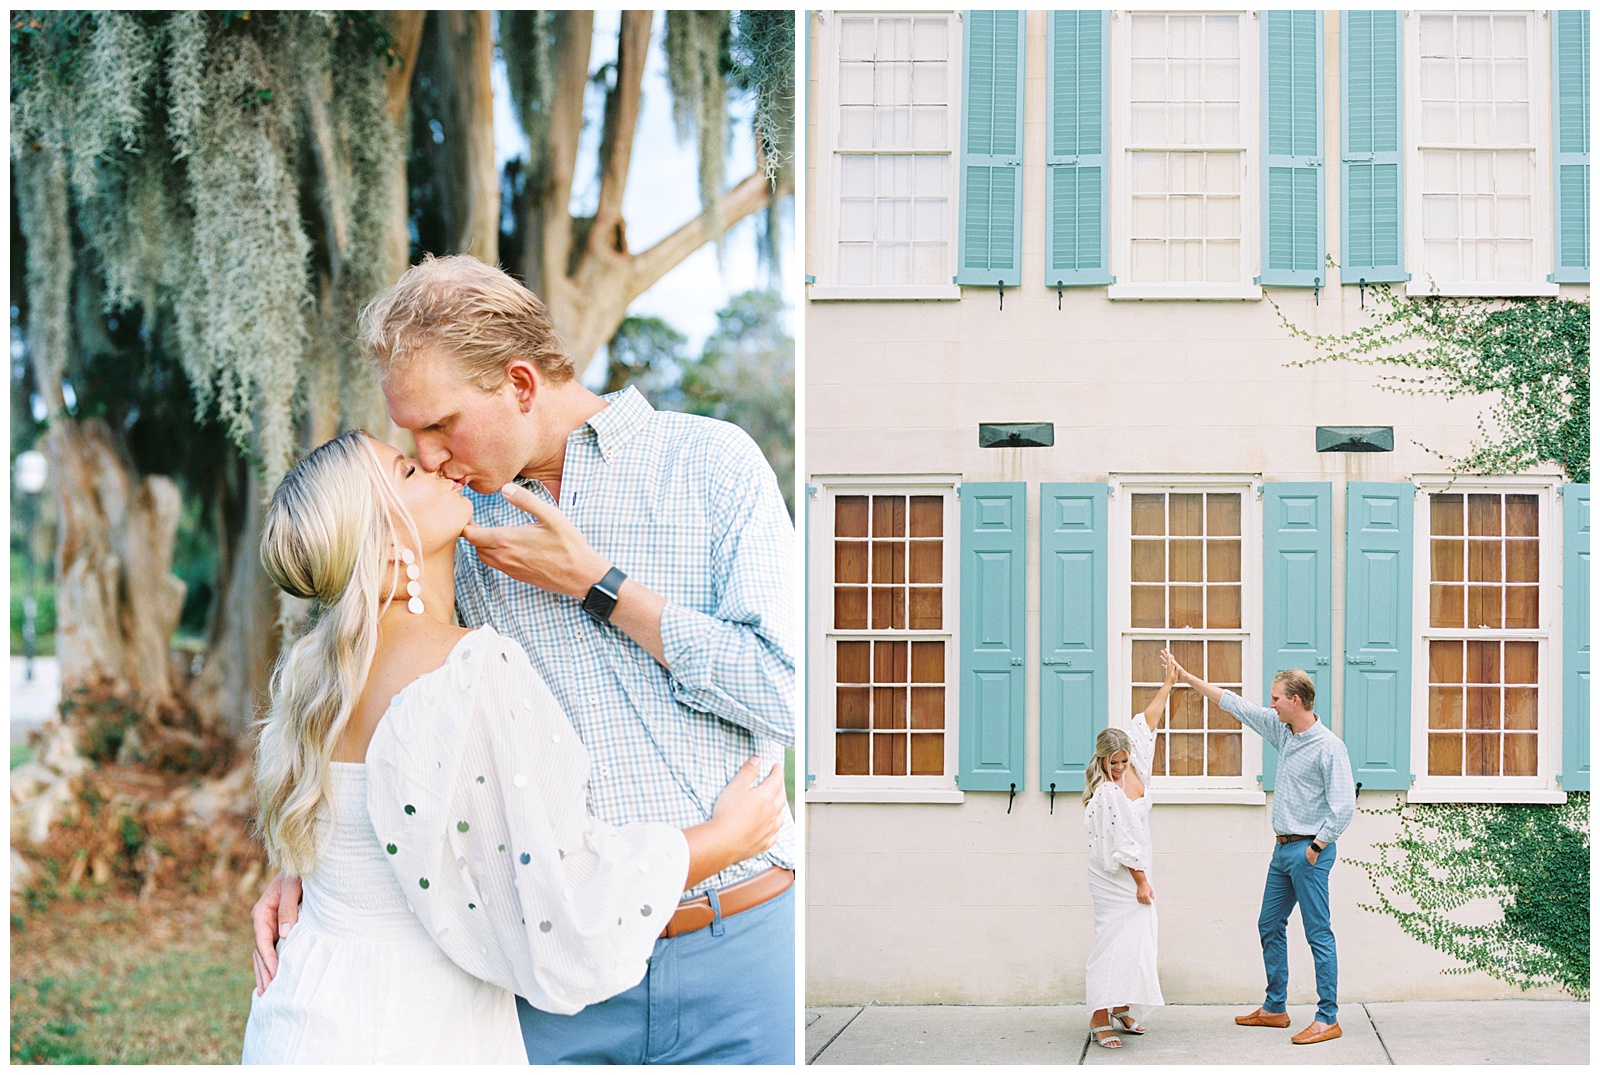 groom tilts bride's head up to kiss her during portraits in downtown Charleston SC